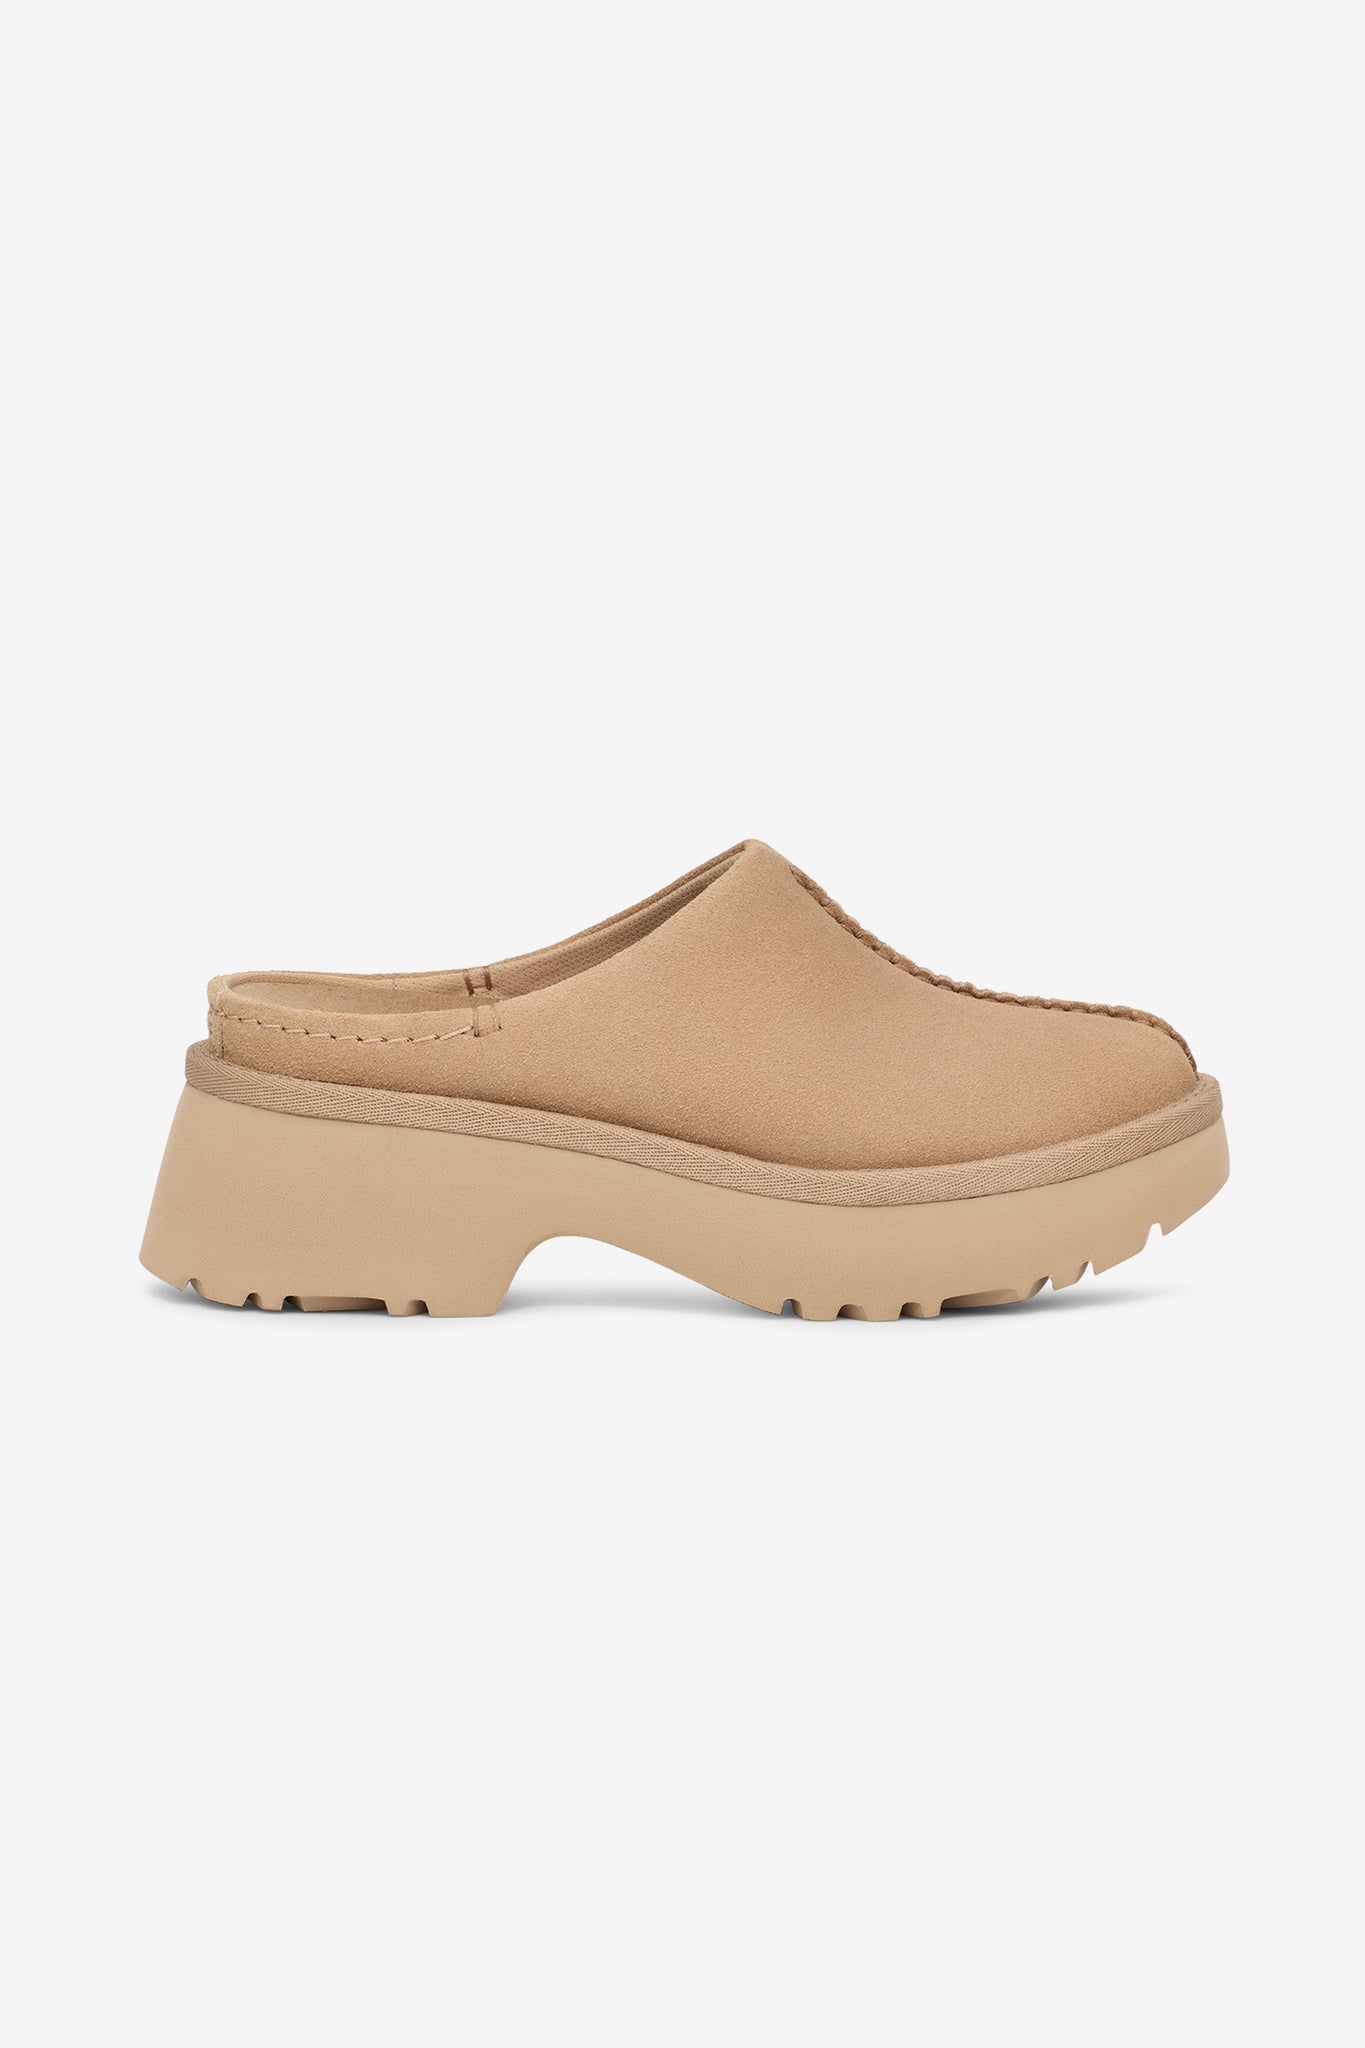 UGG Women's New Heights Clog in Sand